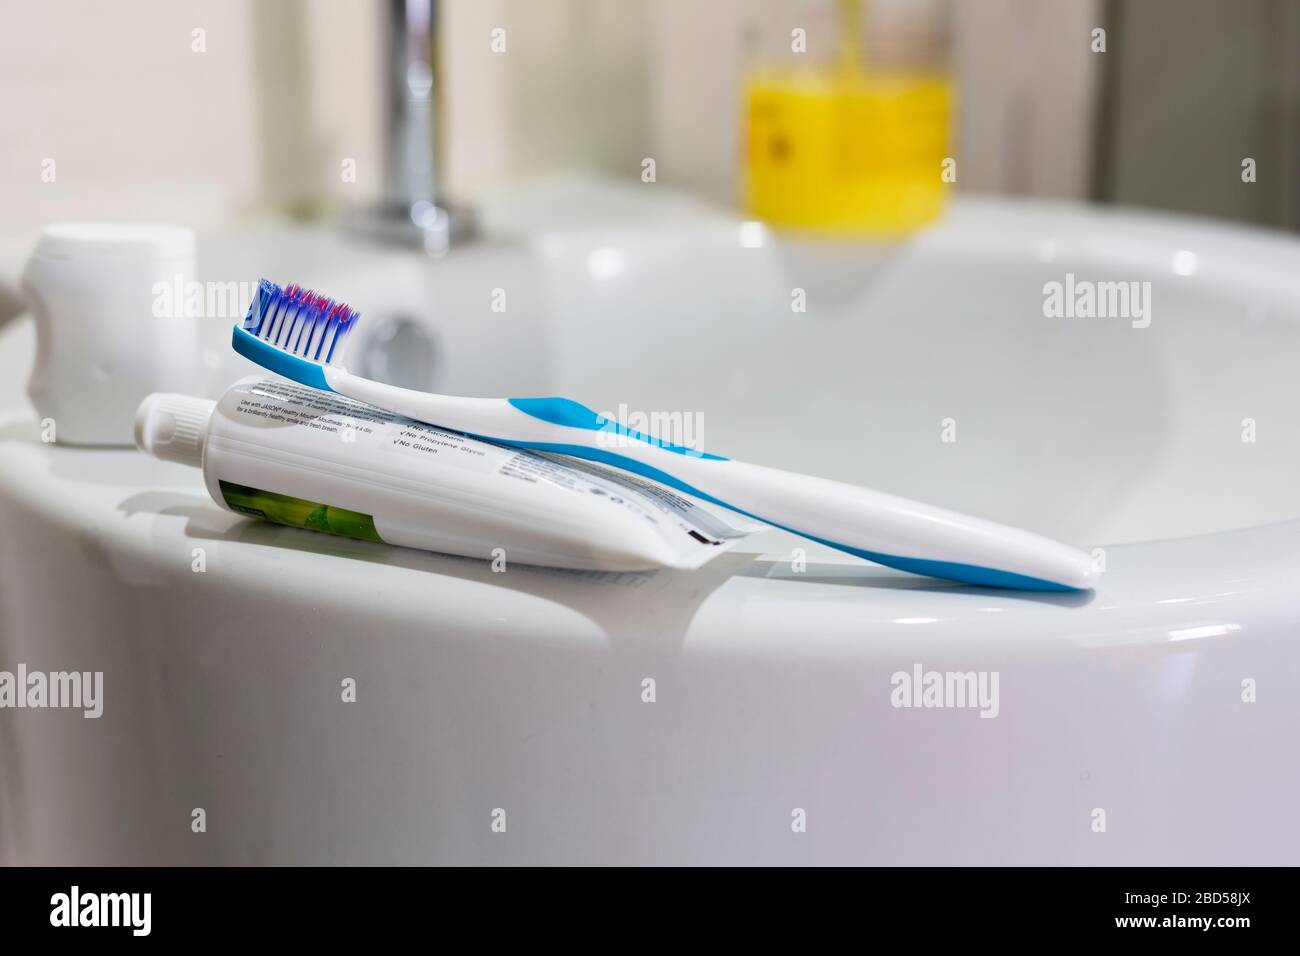 Oral care products Stock Photo